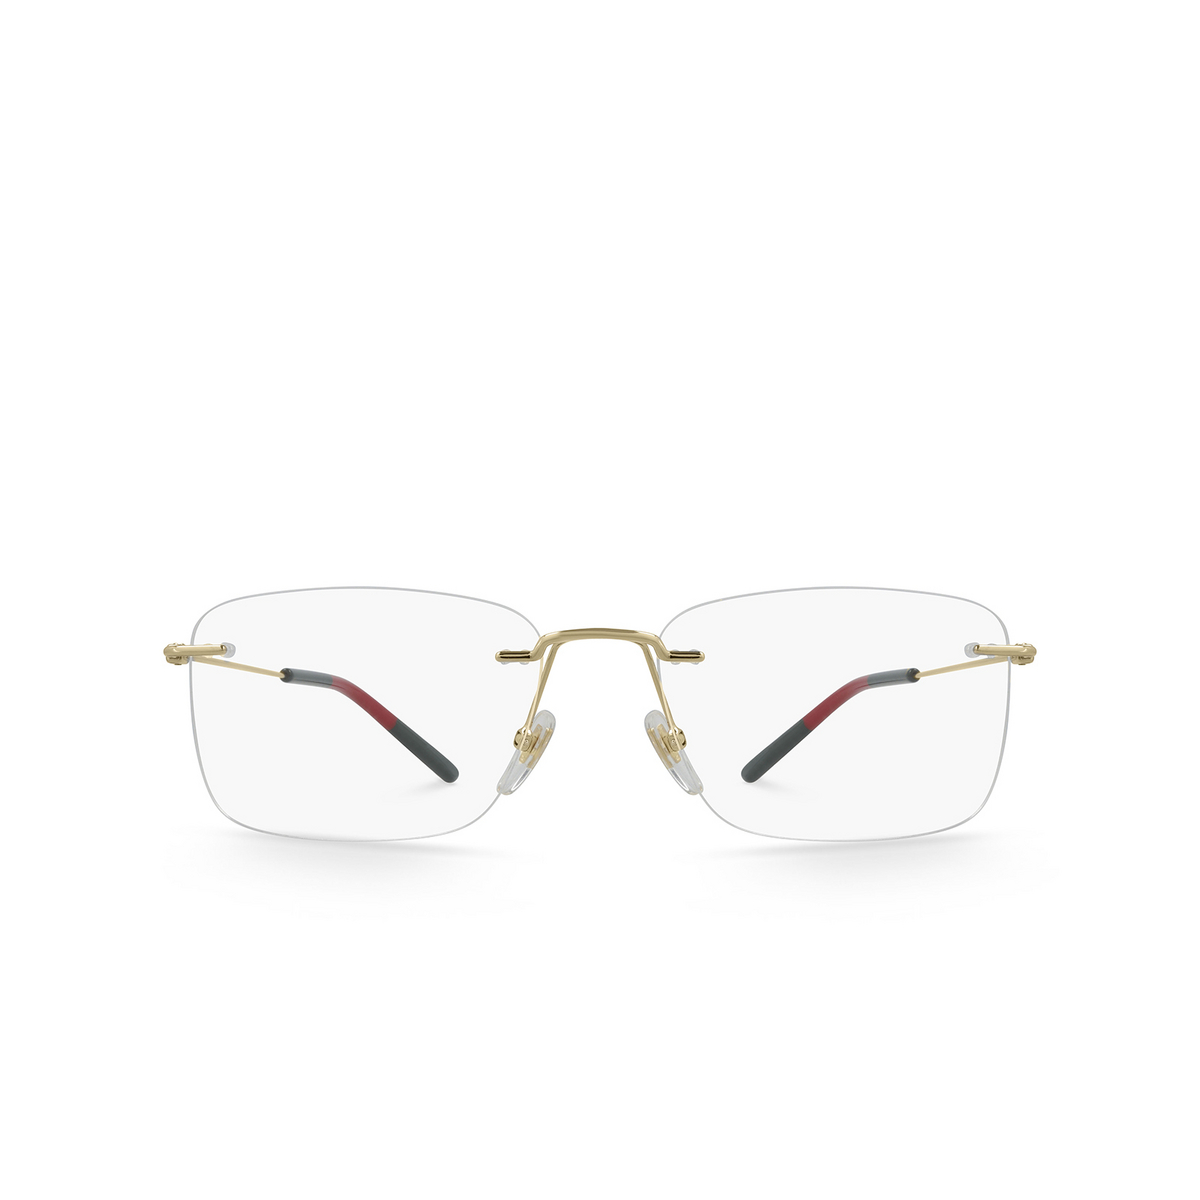 Gucci® Rectangle Eyeglasses: GG0399O color 002 Gold - front view